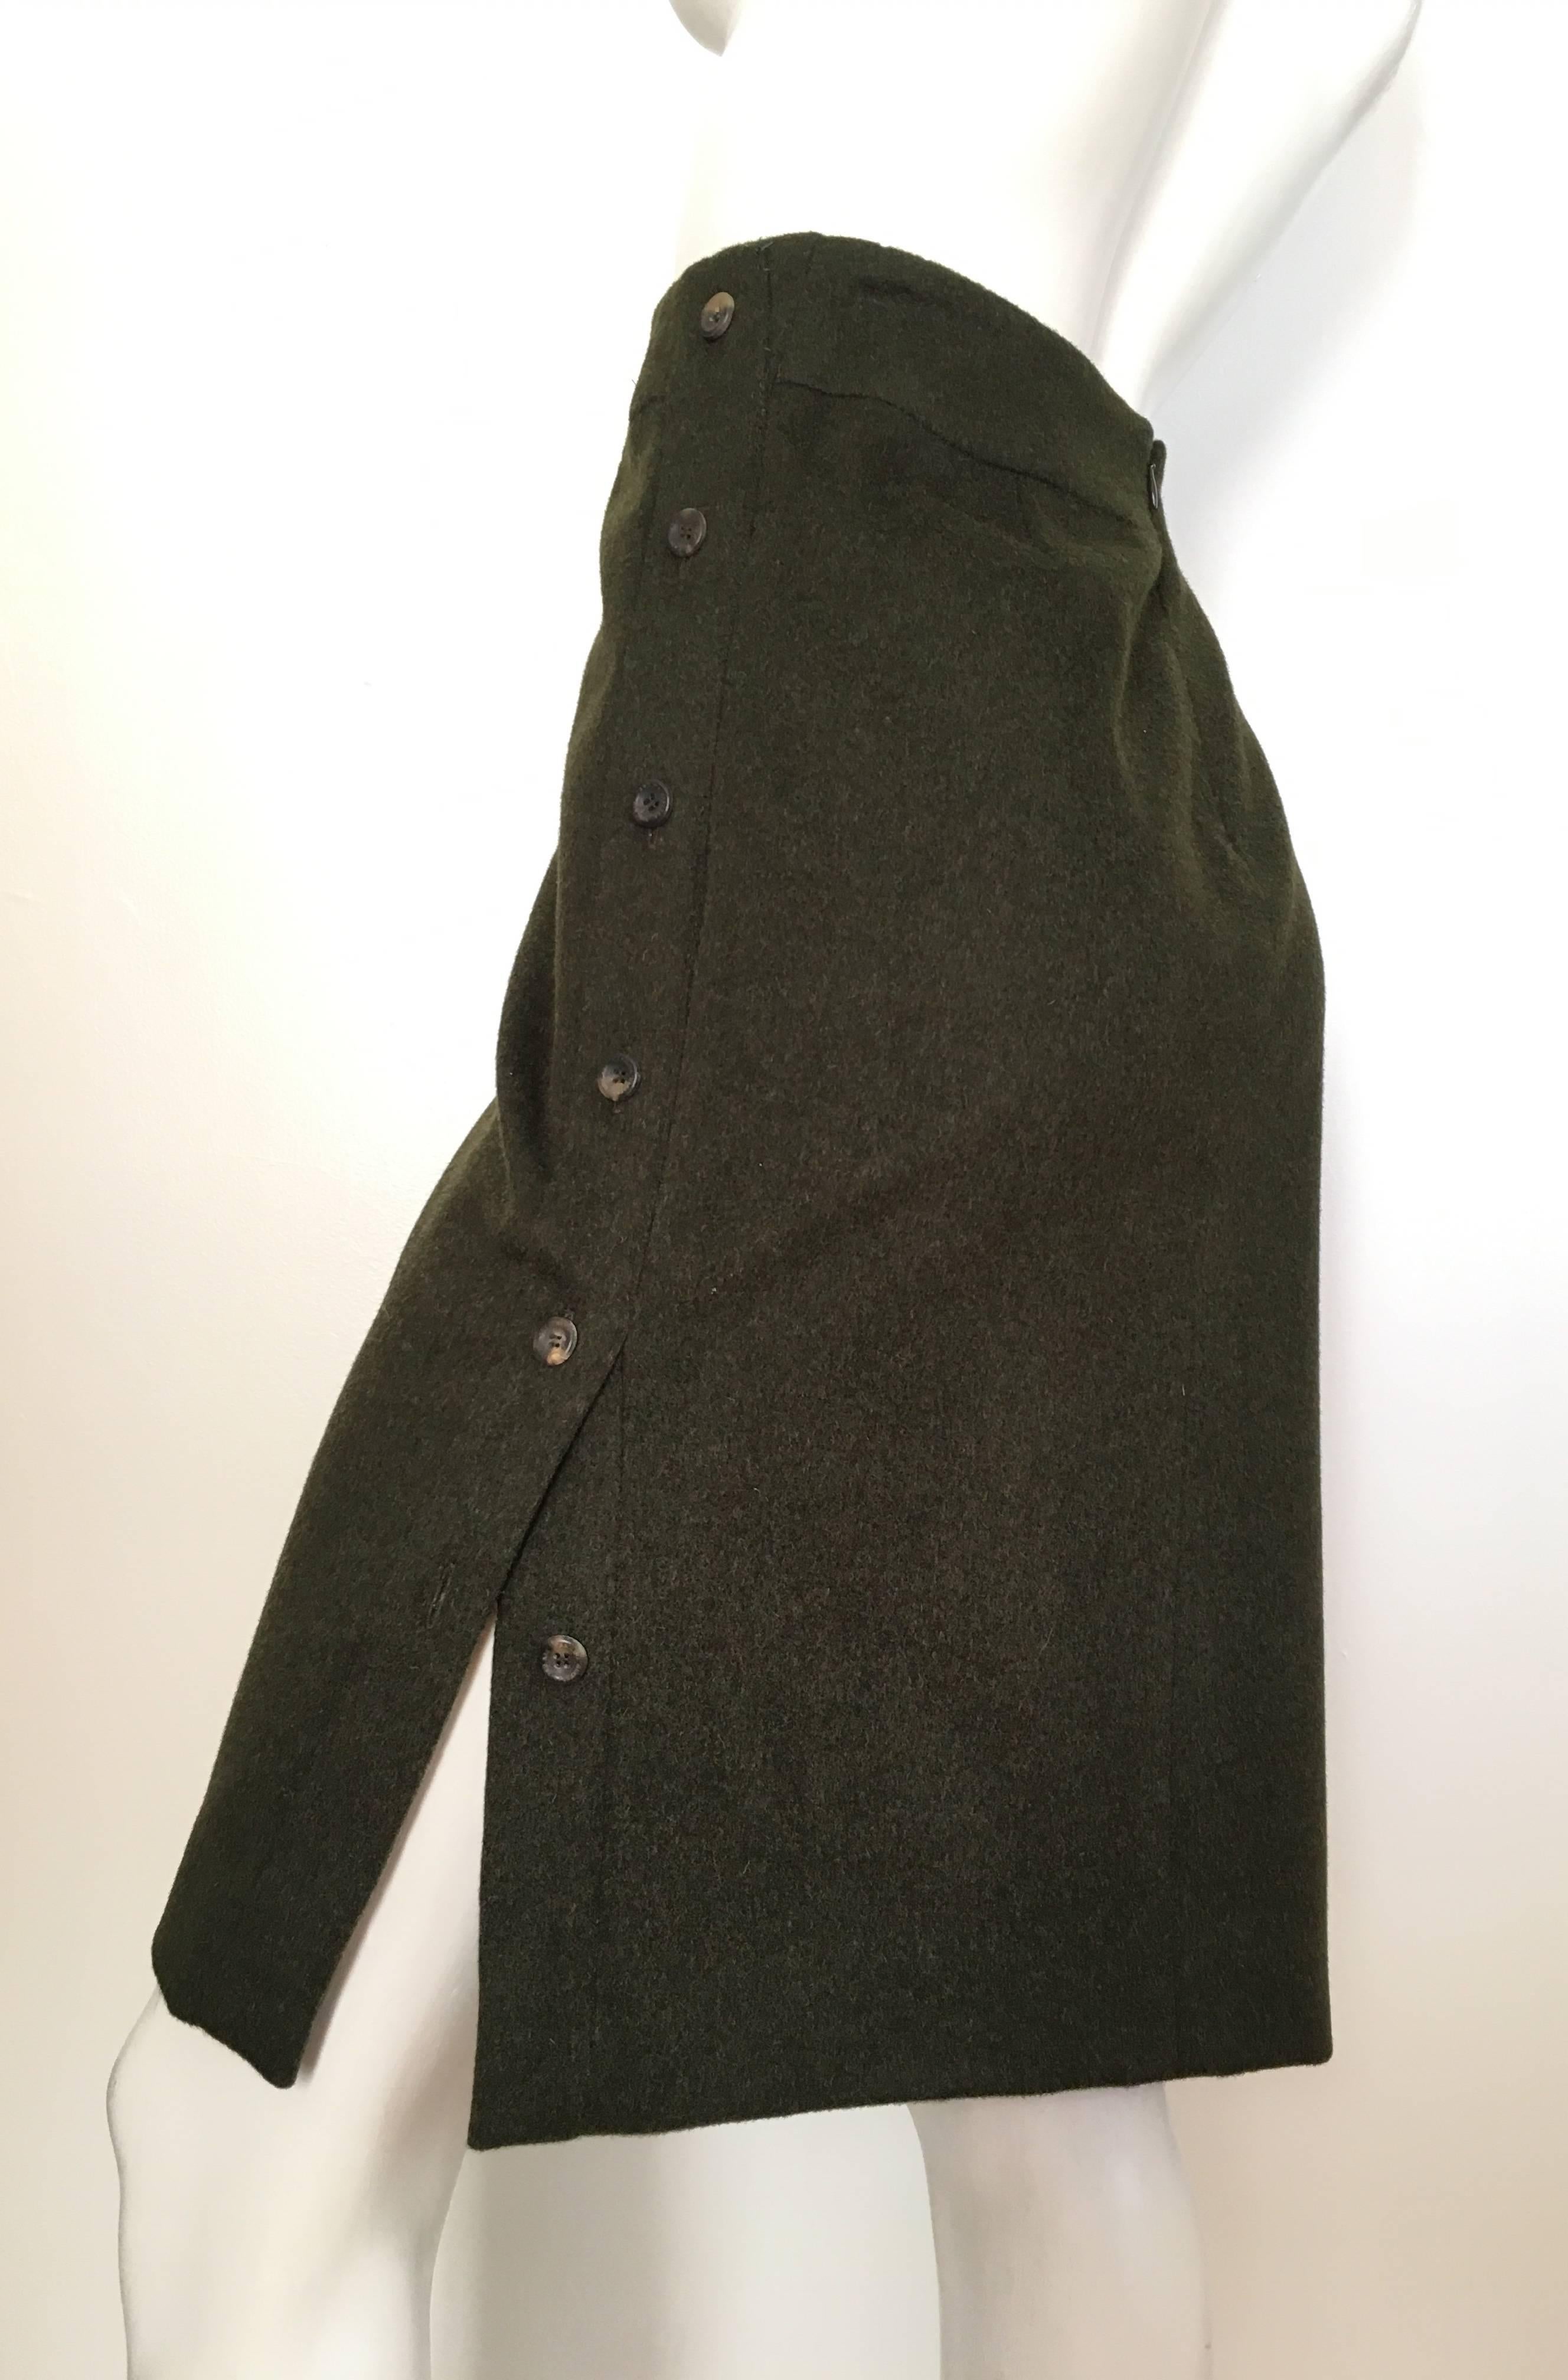 Women's or Men's Carolina Herrera for Saks Olive Brushed Wool Skirt Size 10 Made in Italy. For Sale